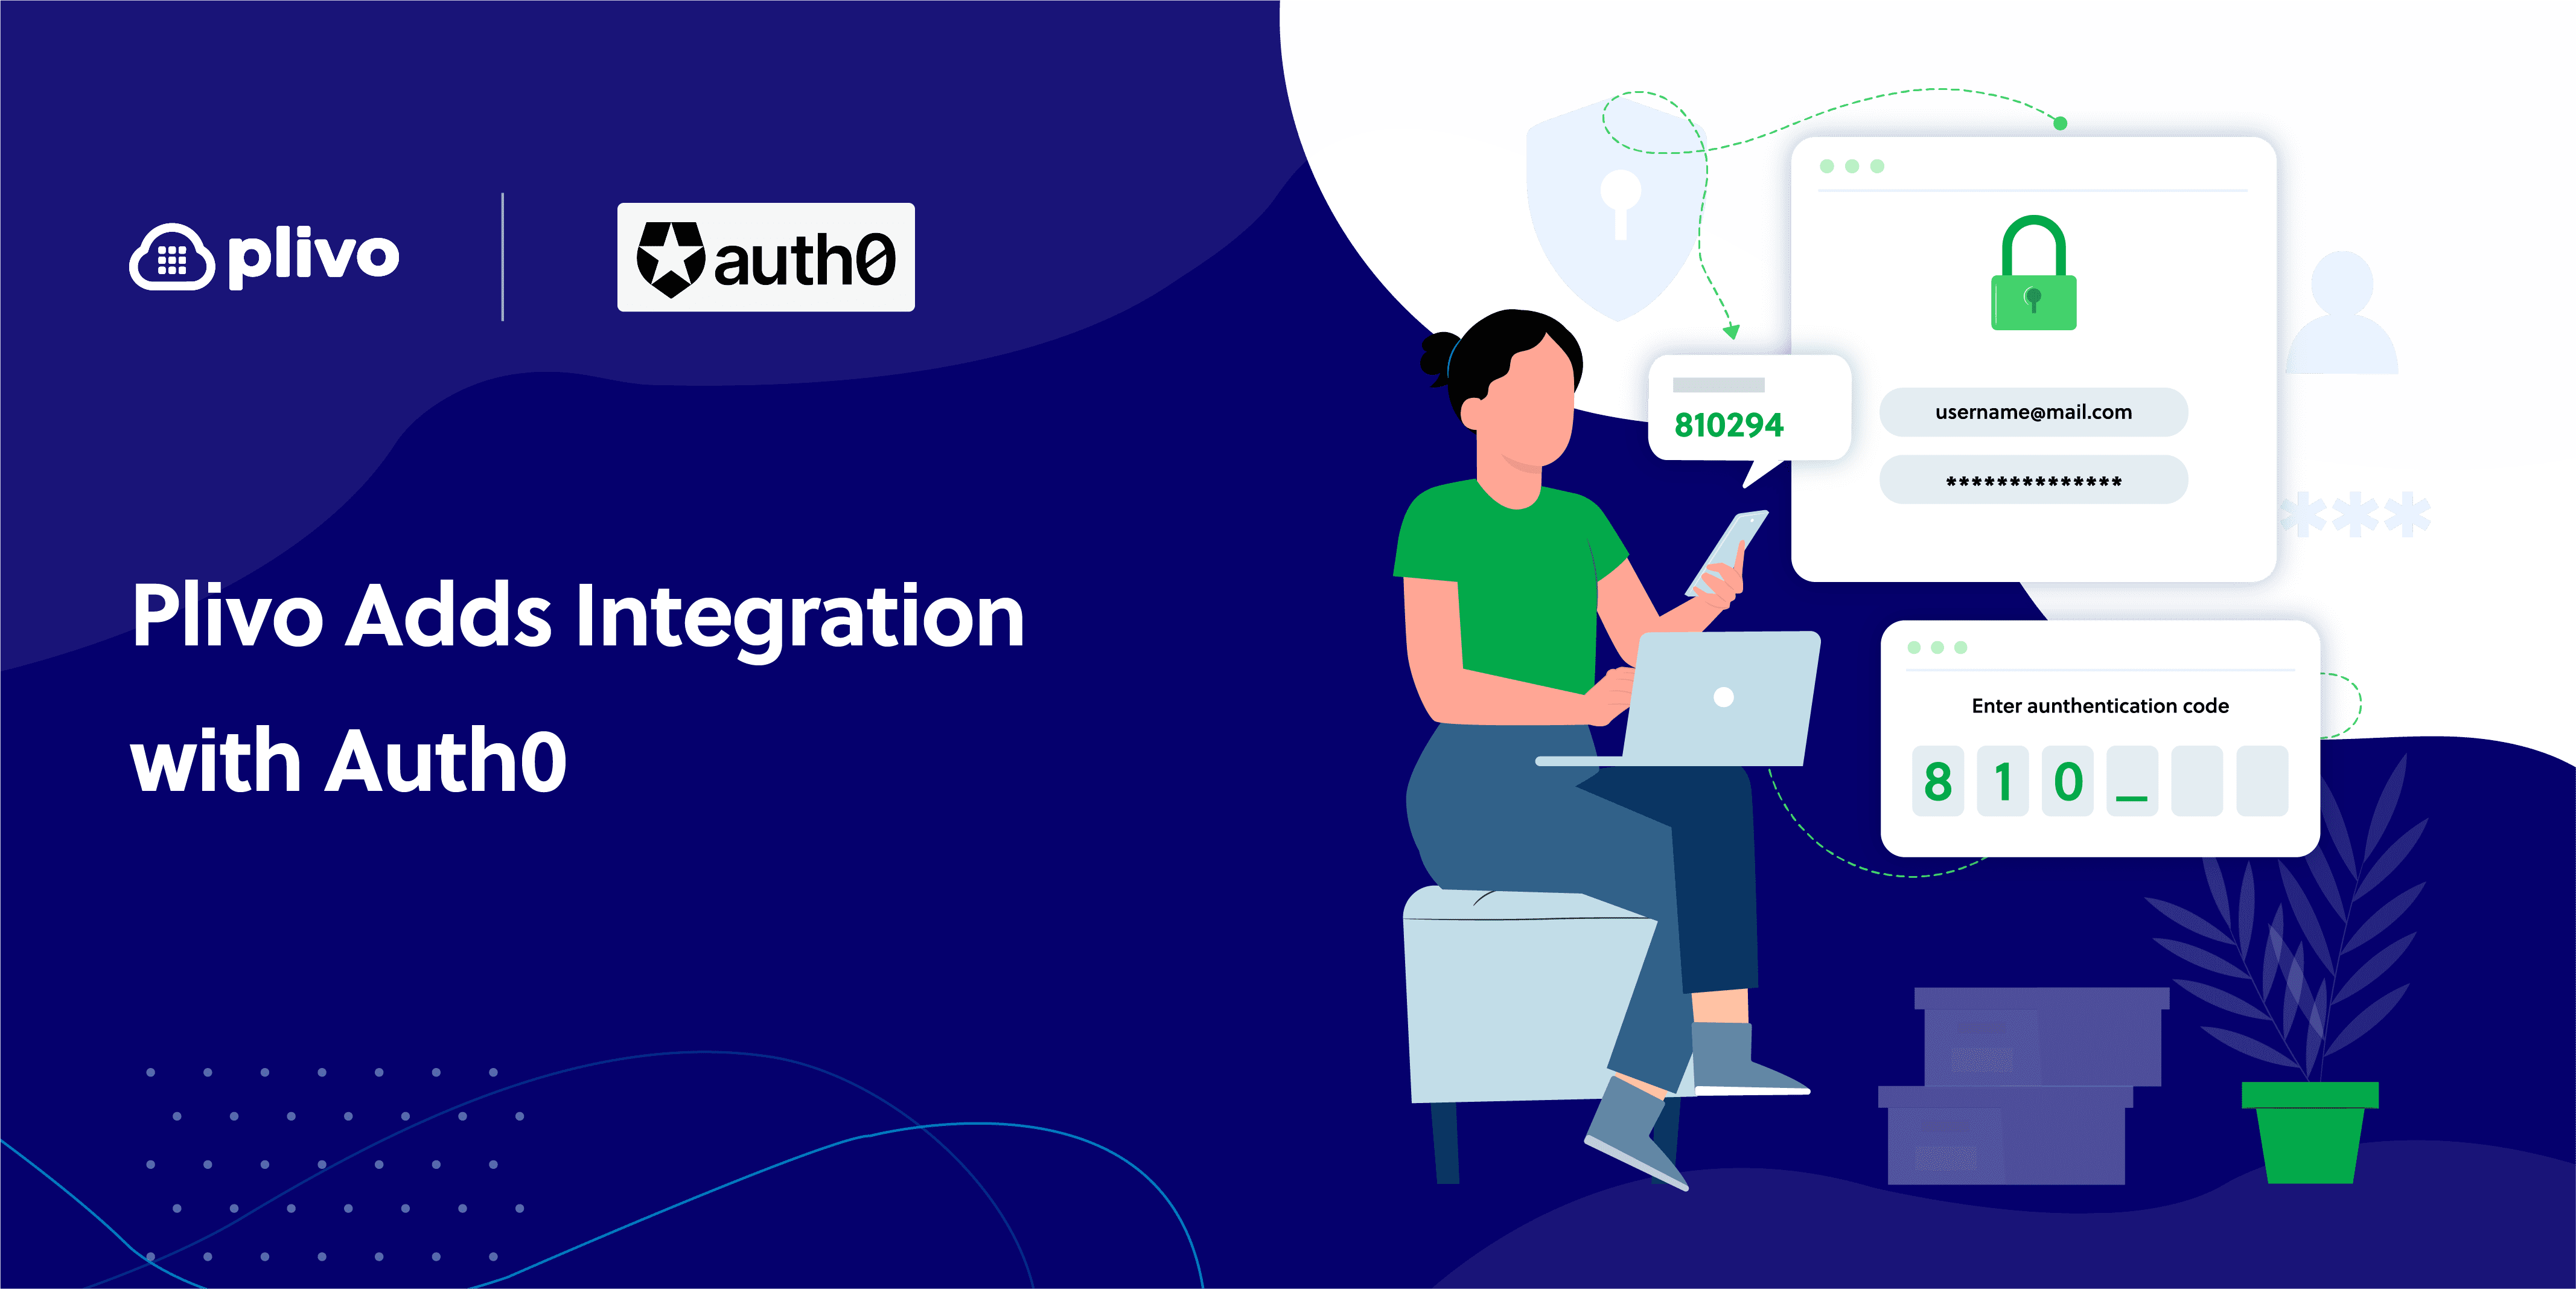 Plivo Adds Integration with Auth0